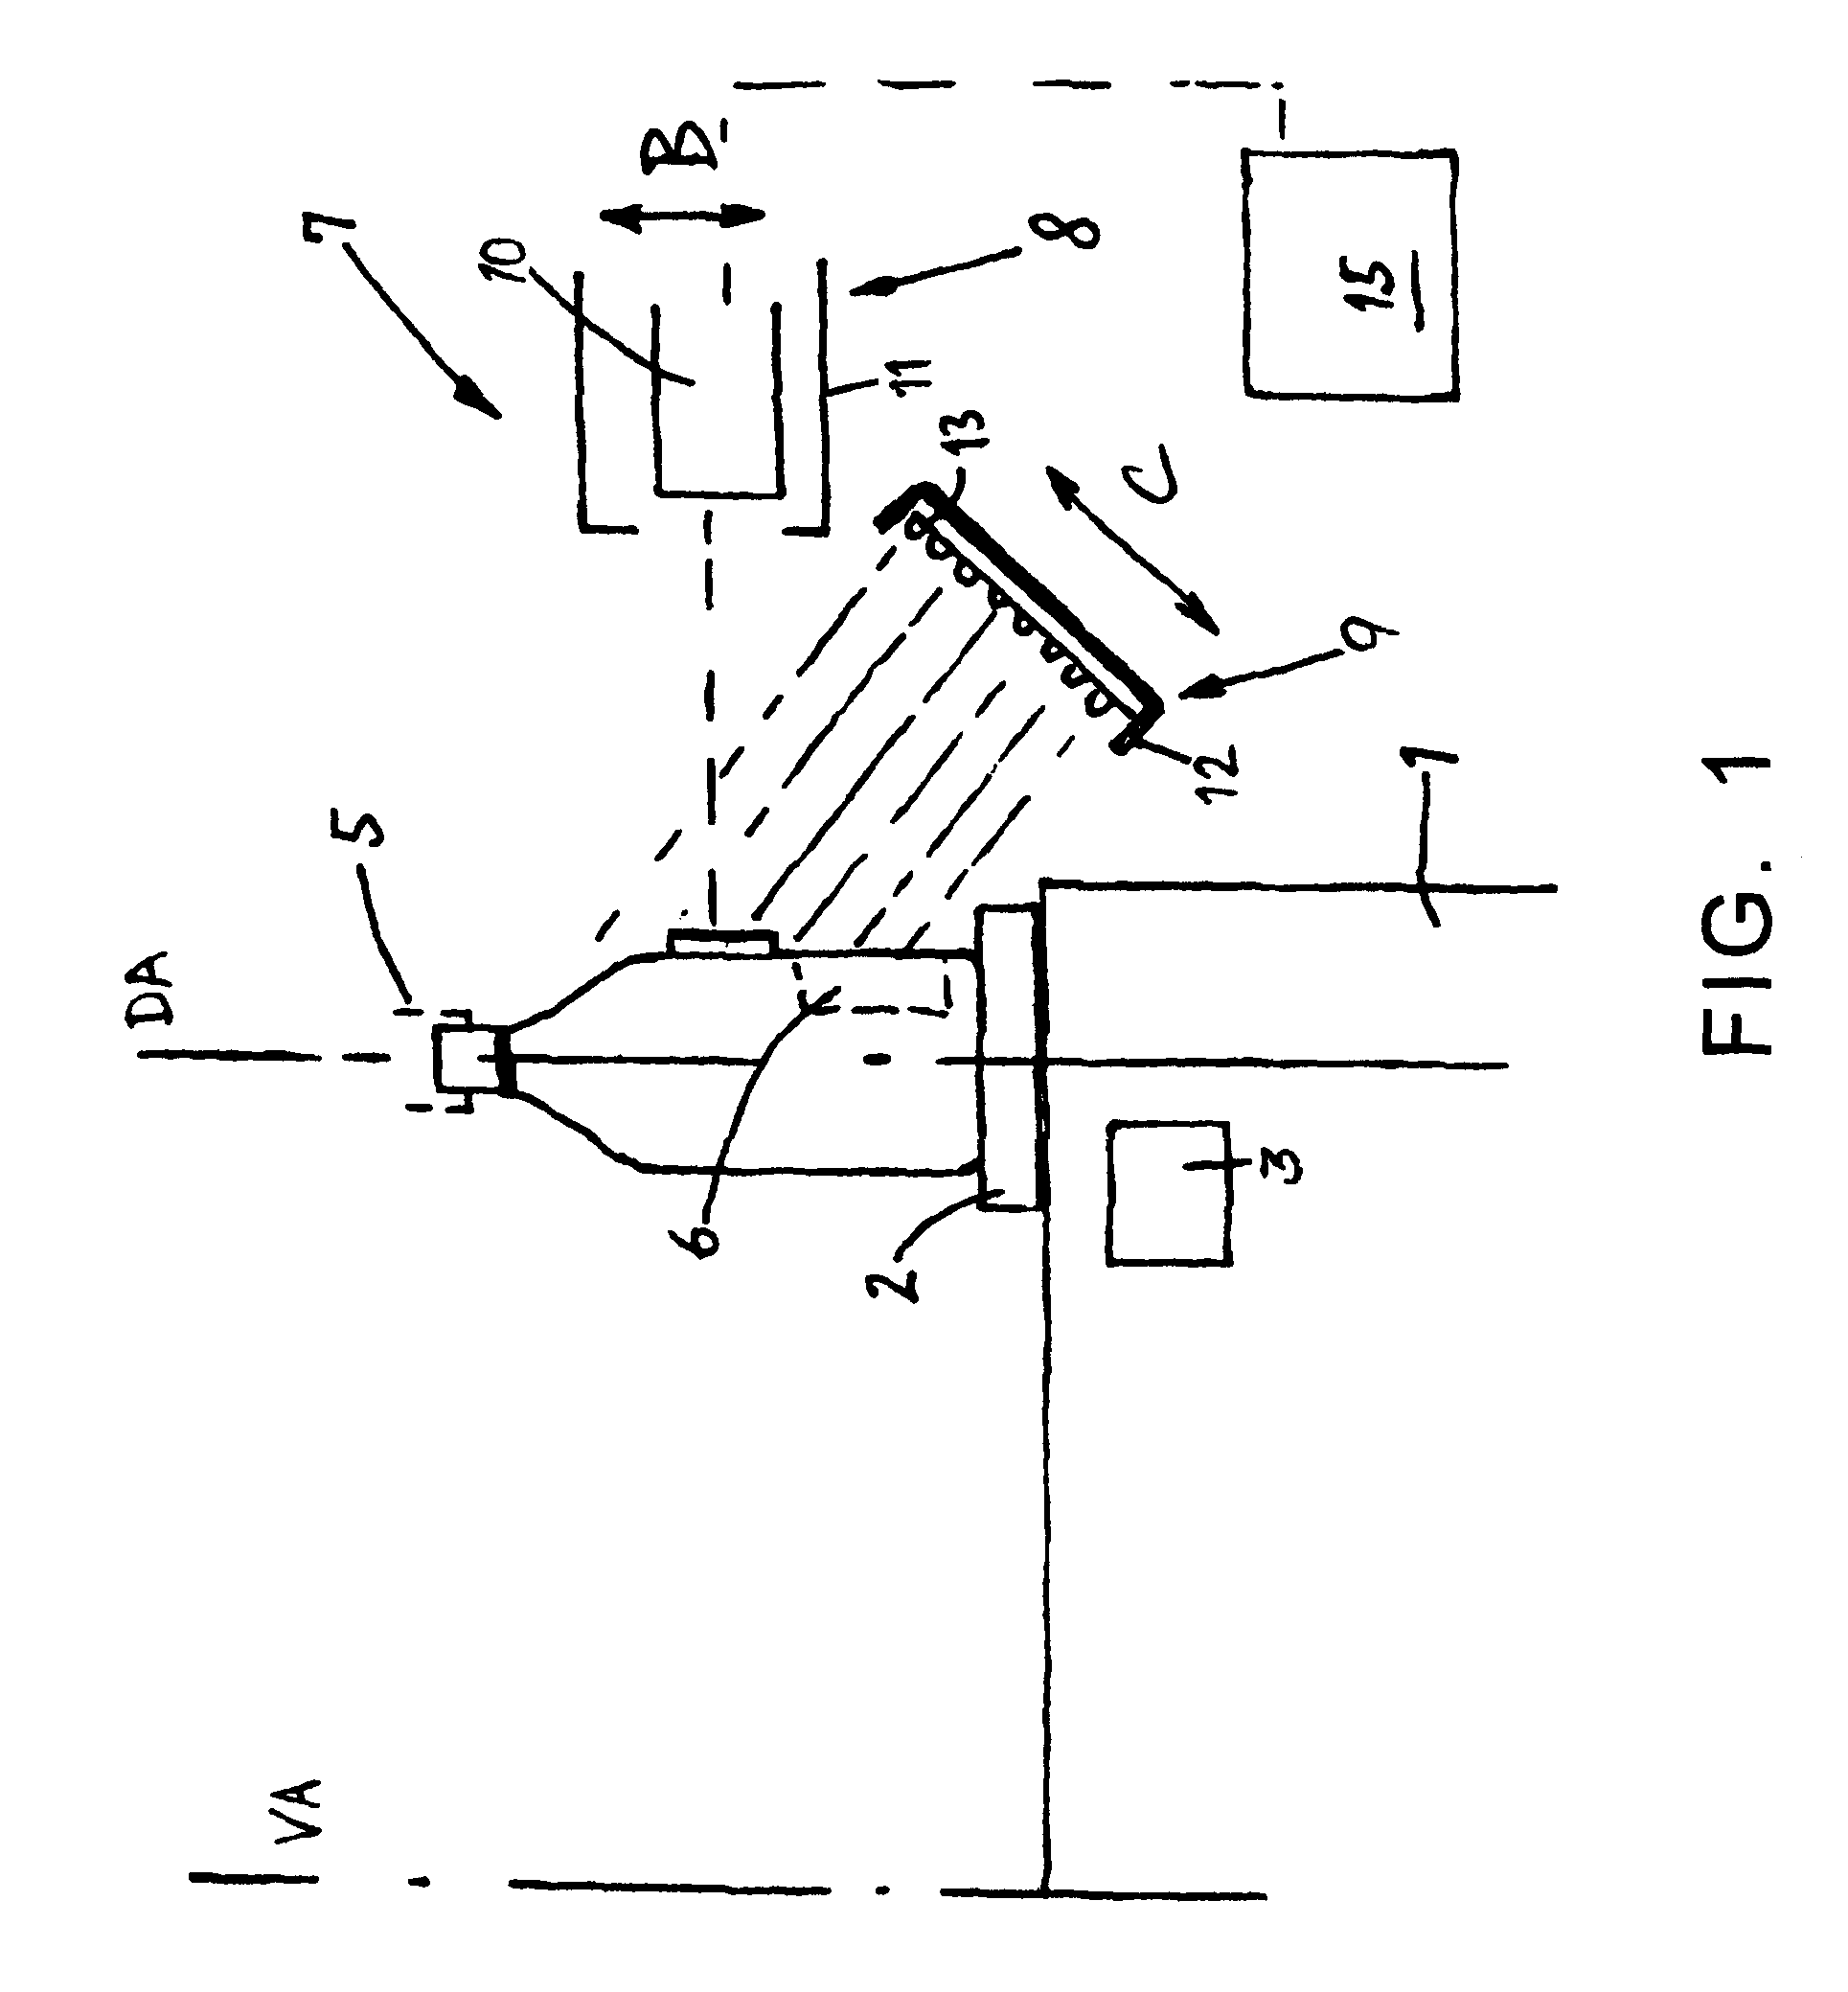 Beverage bottling plant having an apparatus for inspecting bottles or similar containers with an optoelectric detection system and an optoelectric detection system